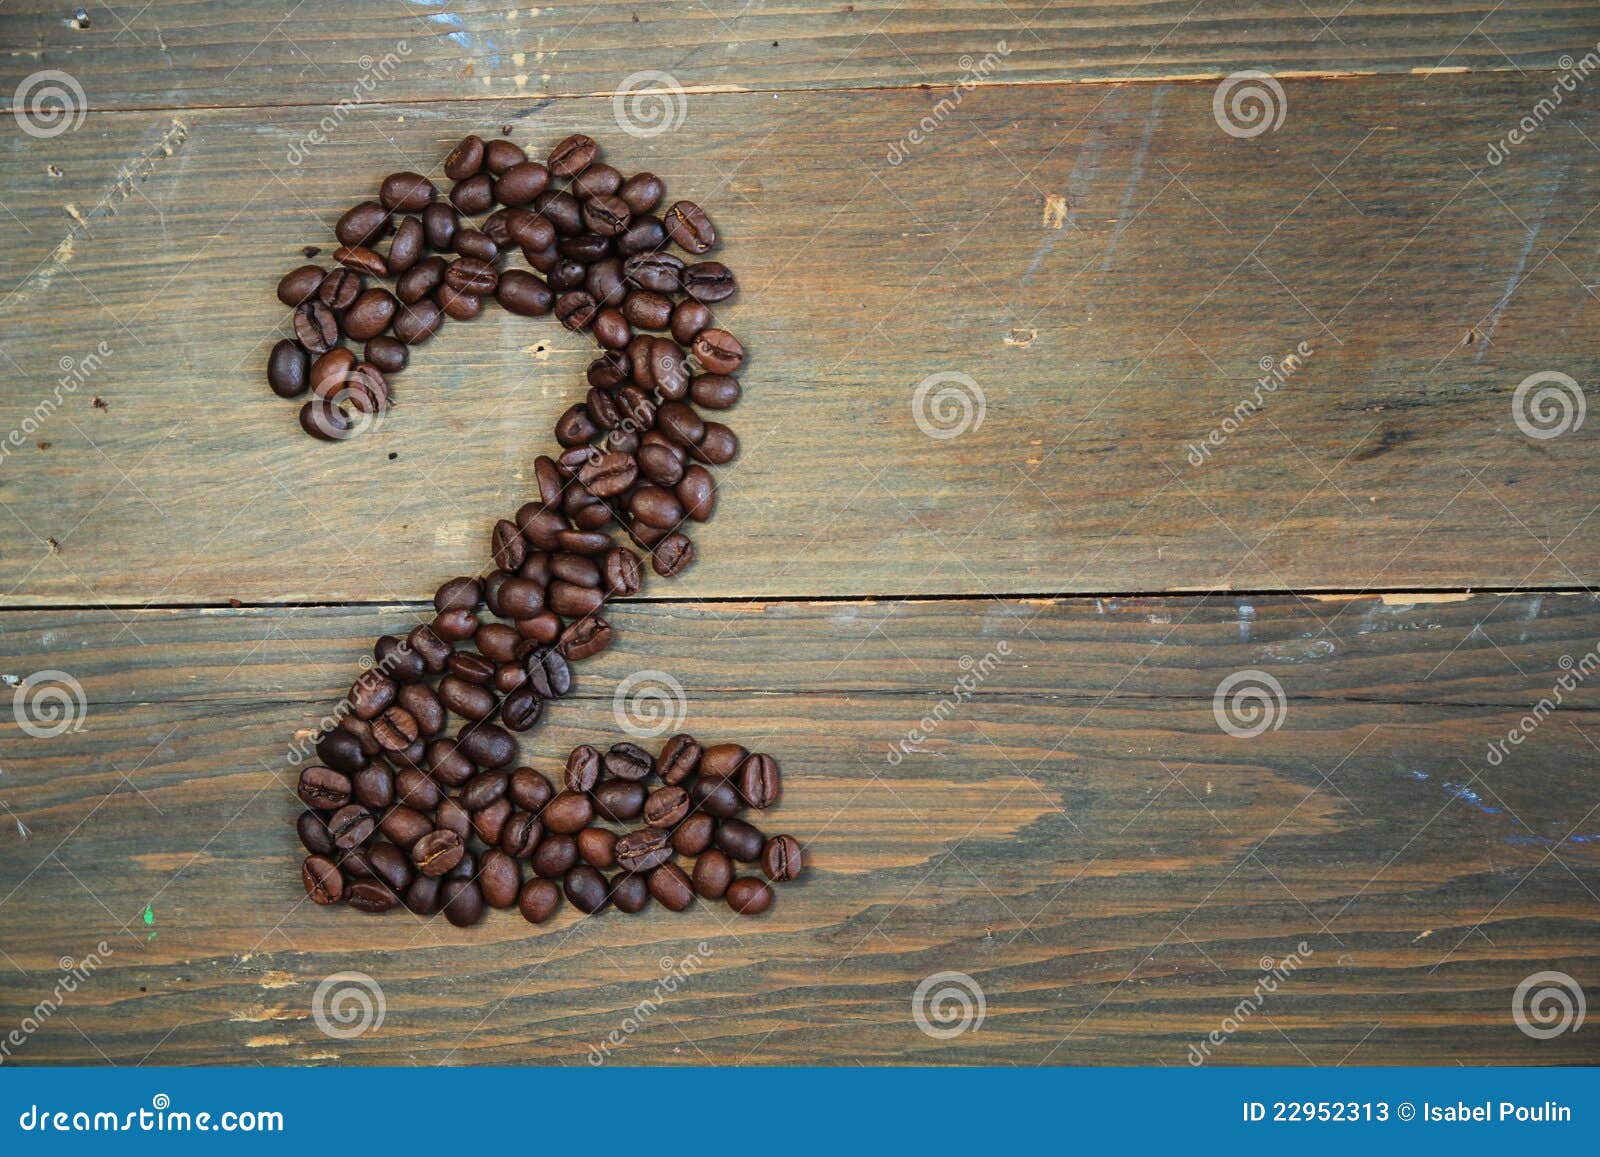 Coffee number two stock image. Image of brown, happy - 22952313